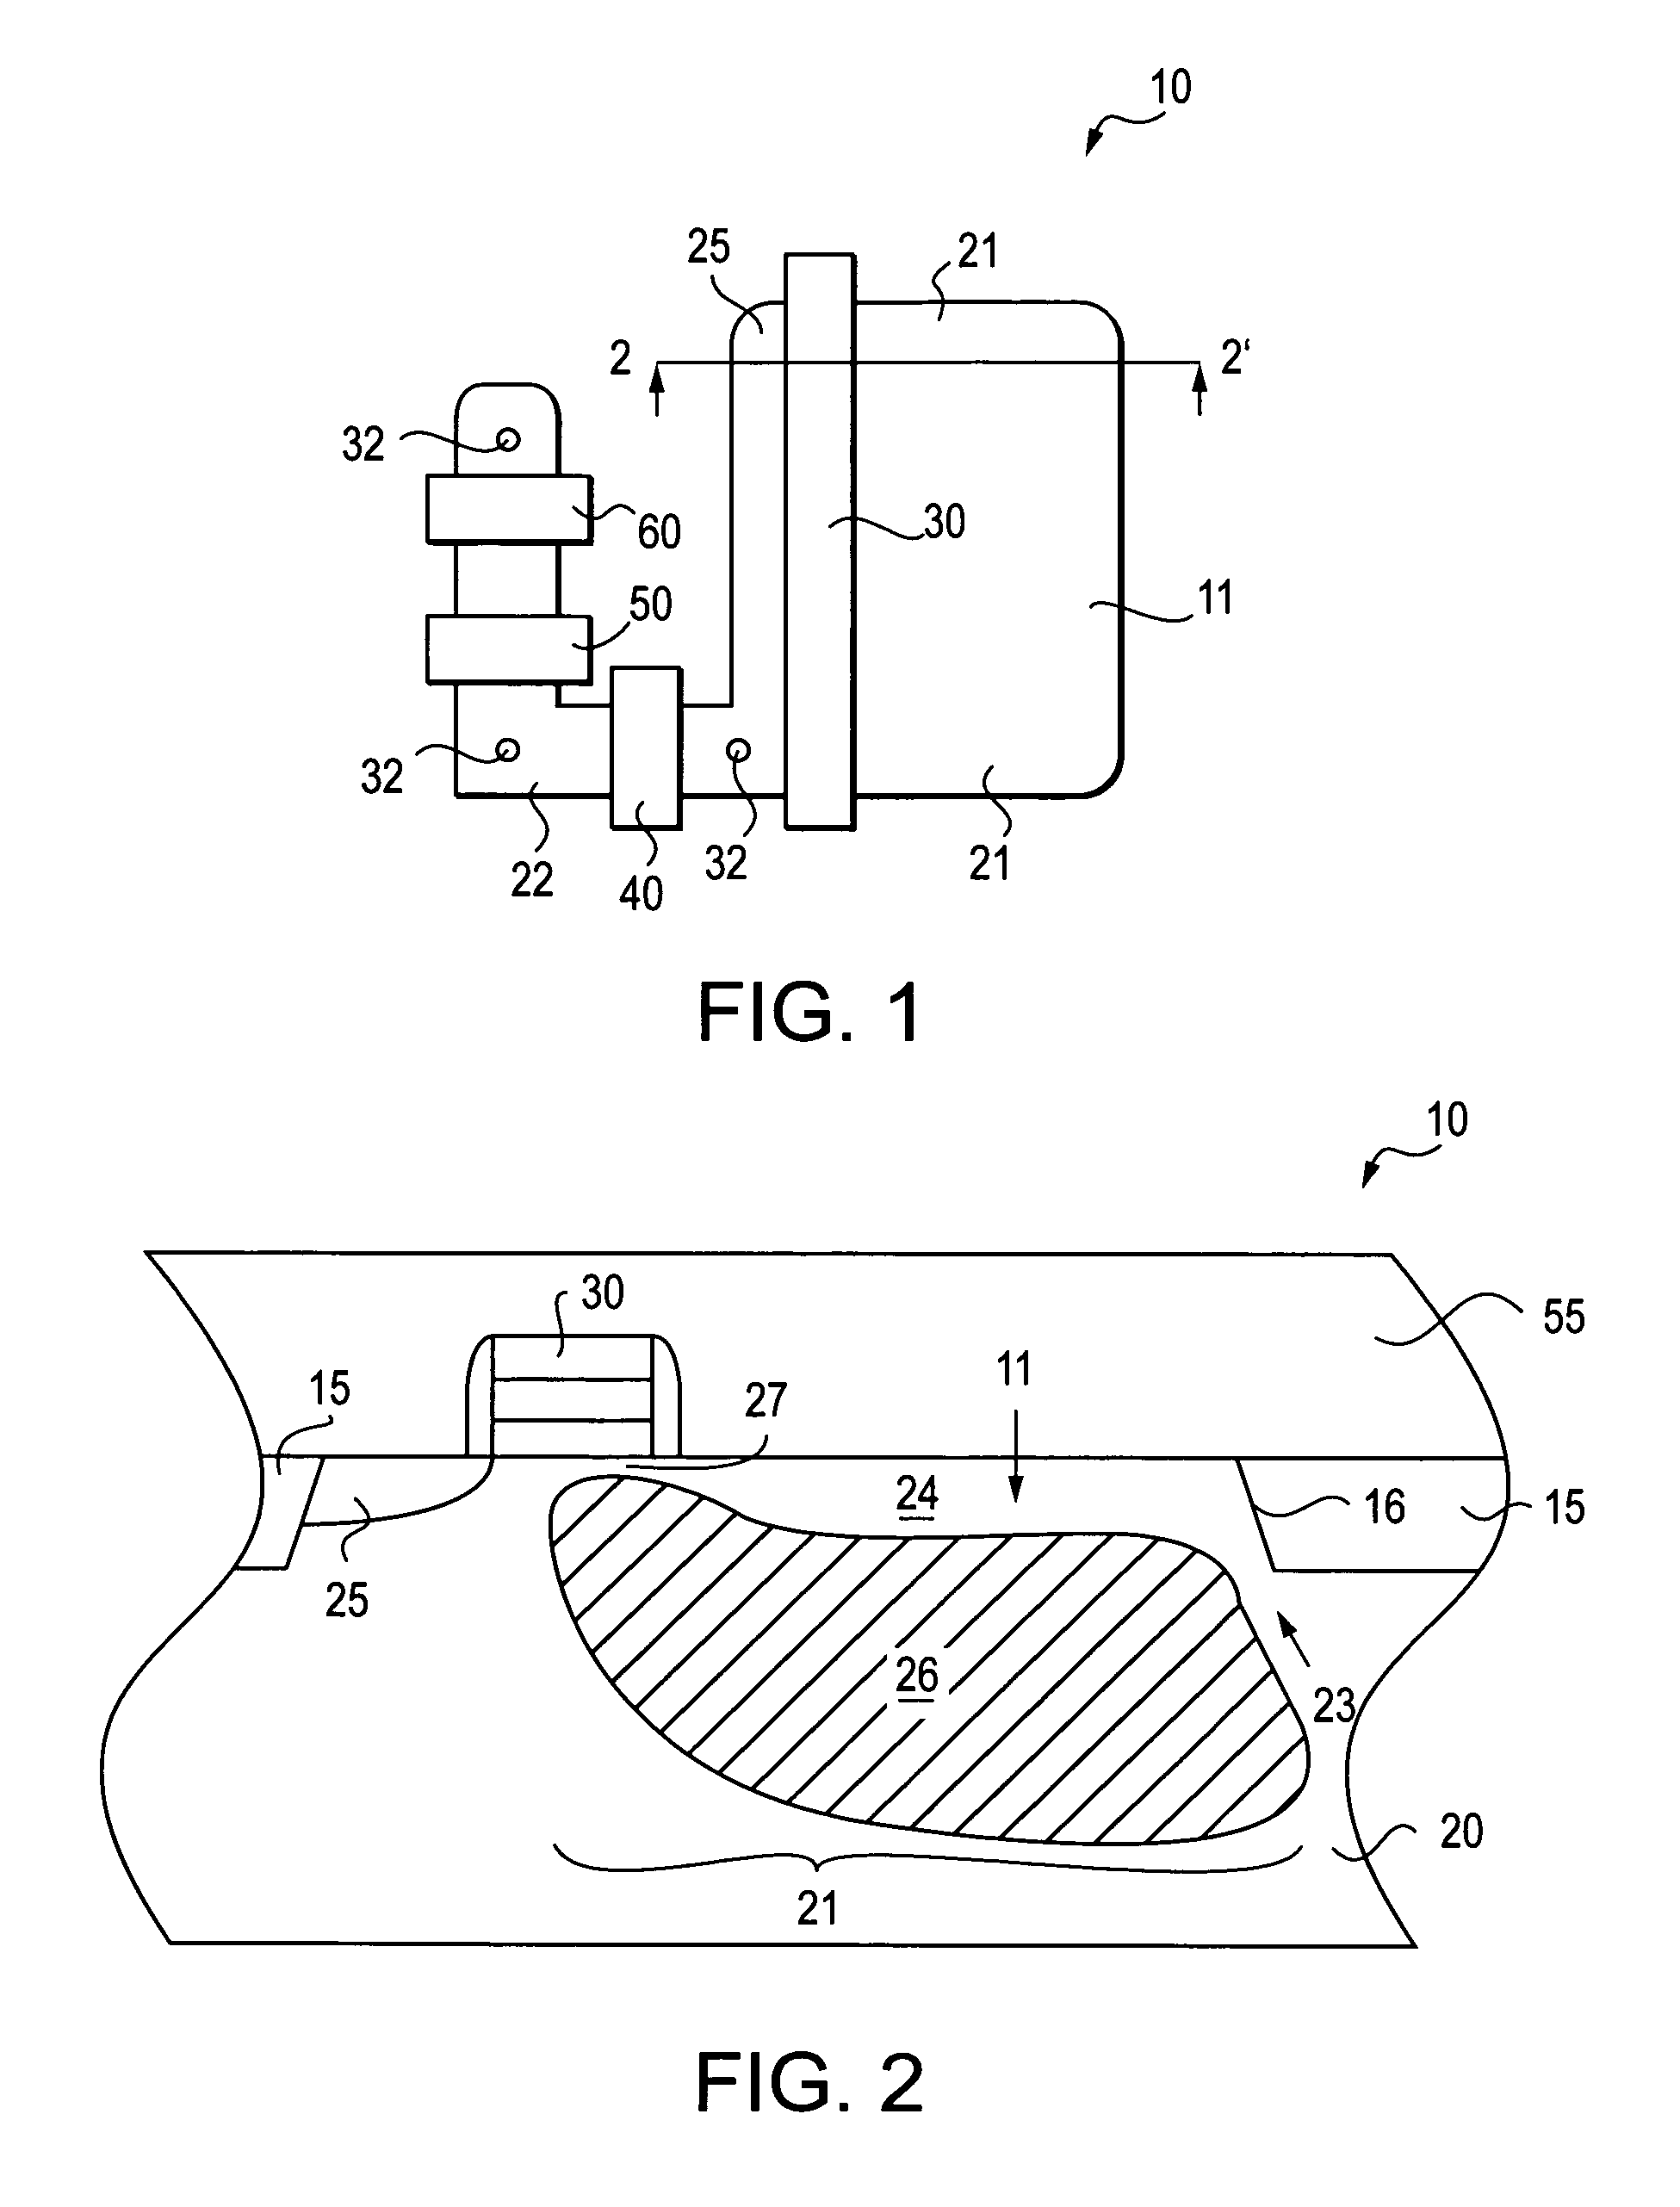 Method of forming photodiode with self-aligned implants for high quantum efficiency